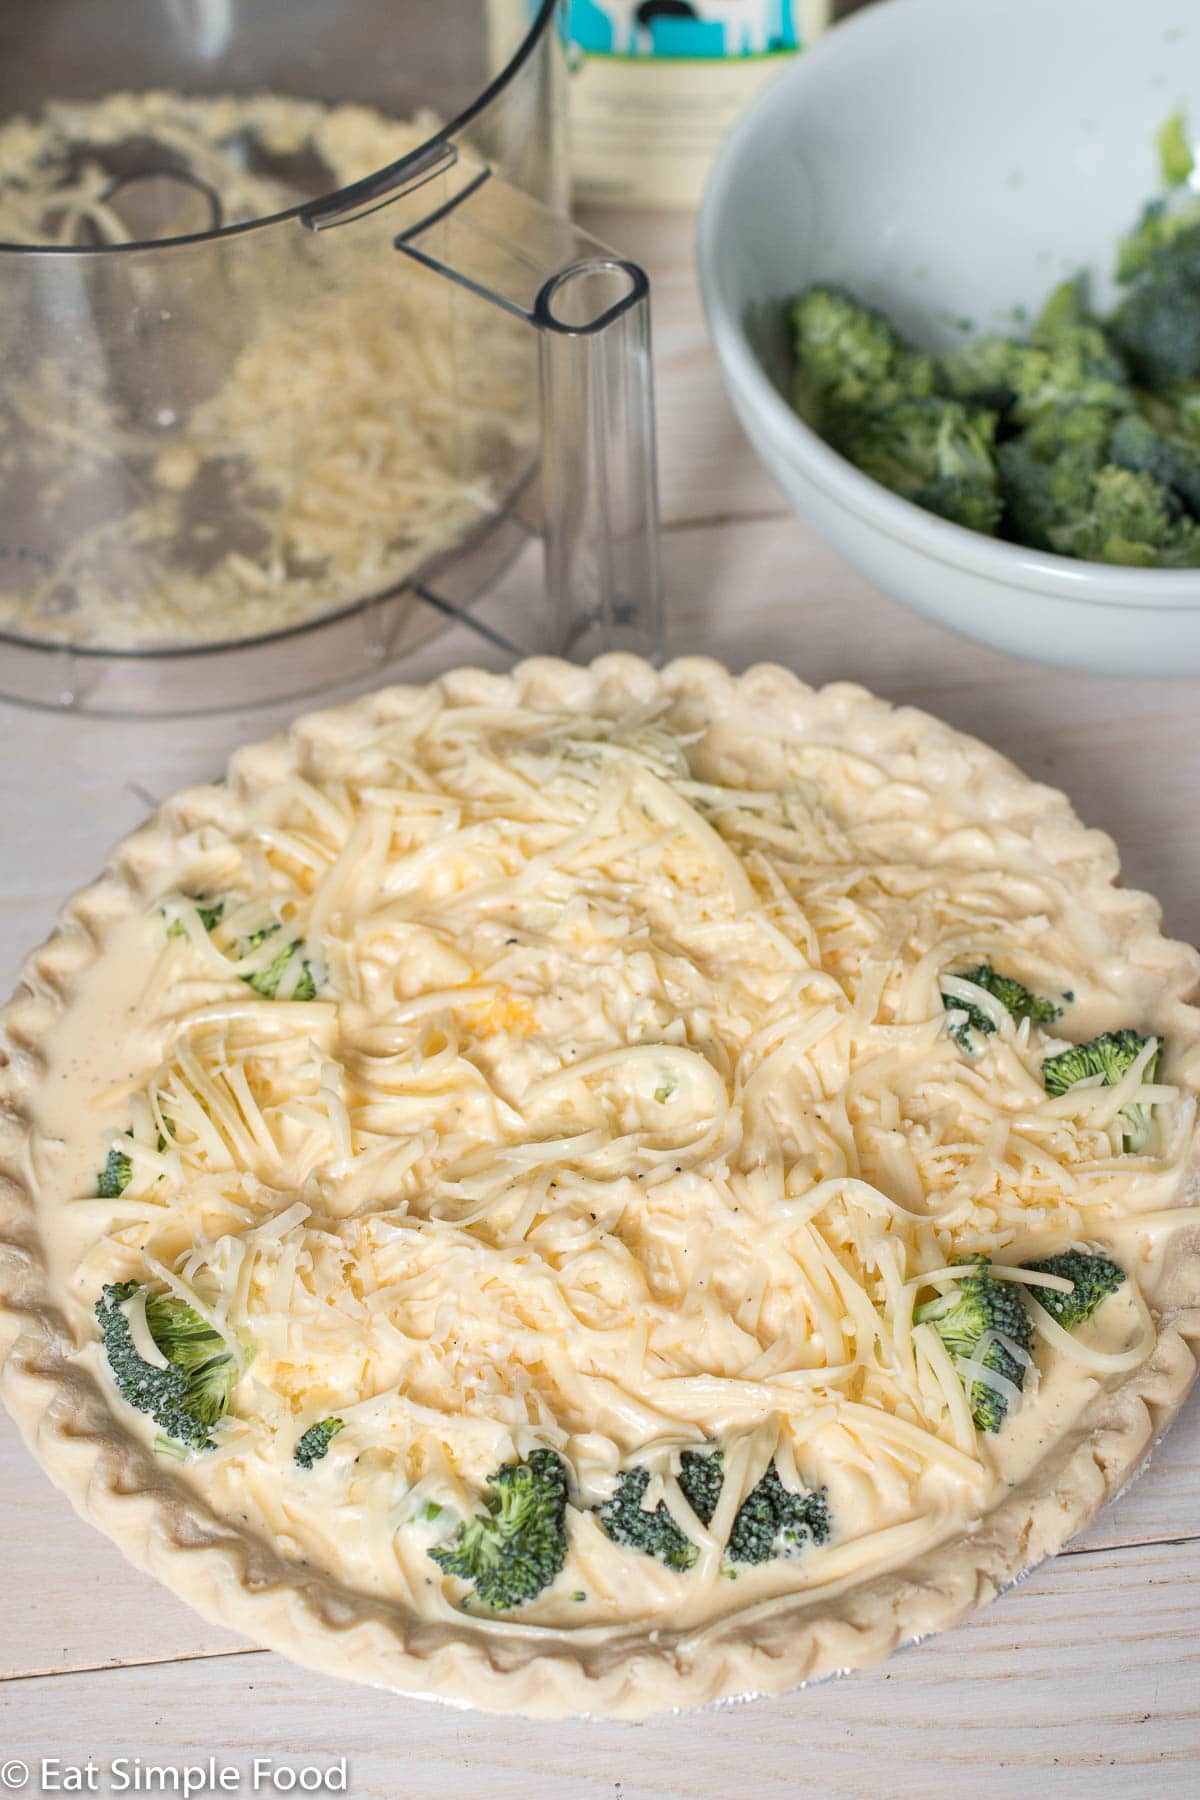 Side view of raw broccoli and swiss cheese quiche with a bowl of broccoli and a bowl of cheese and a carton of milk in the background.